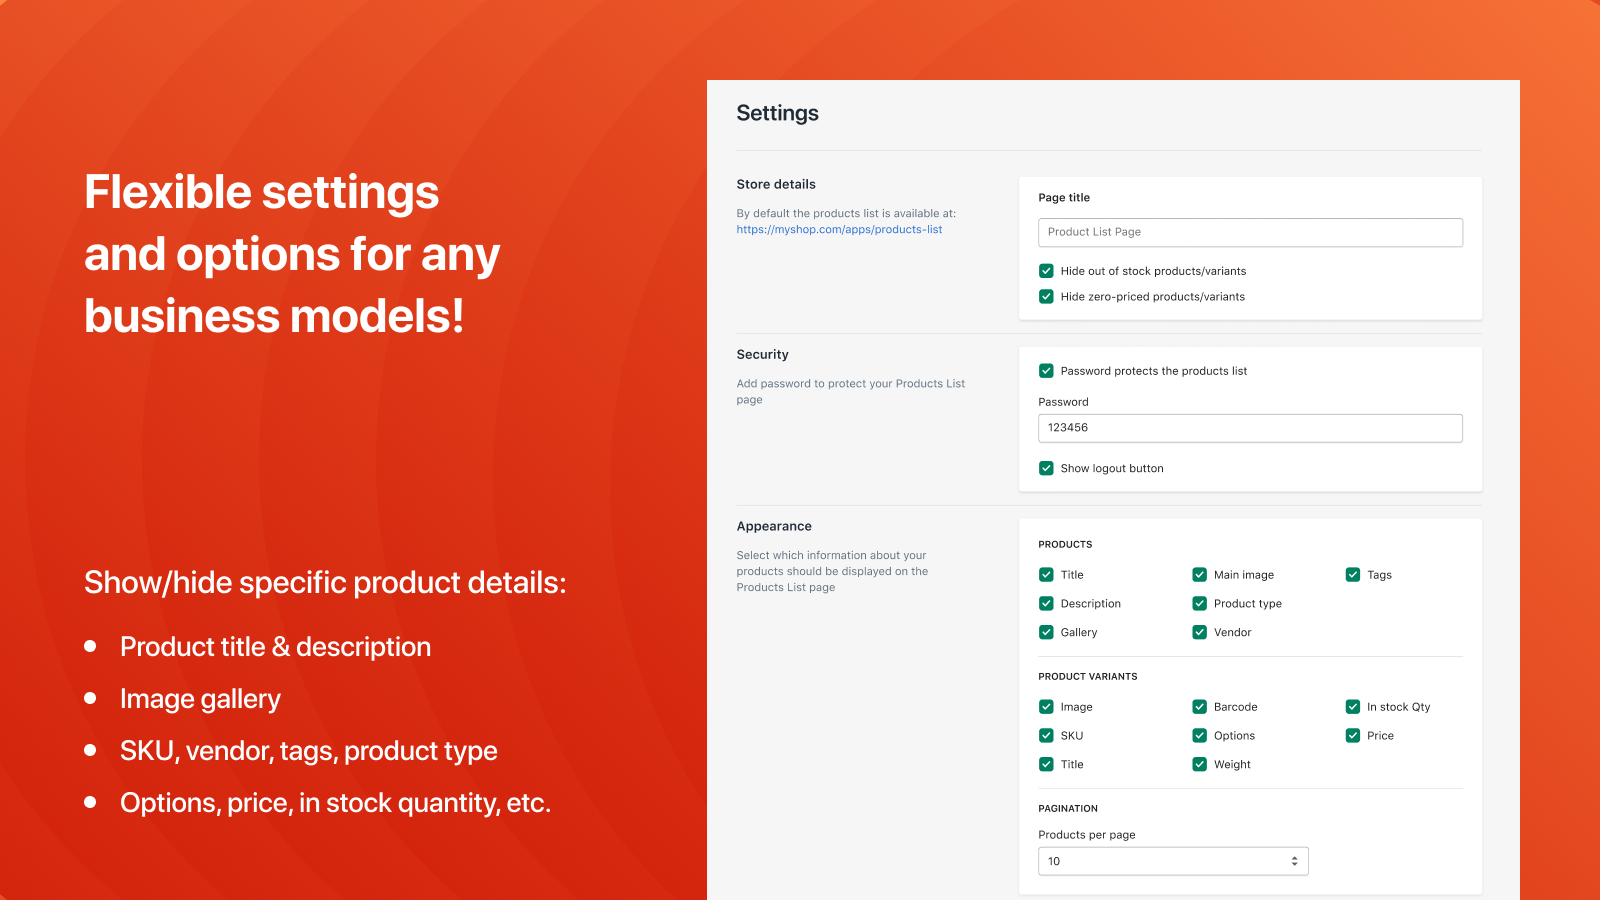 Flexible settings and options for any business models